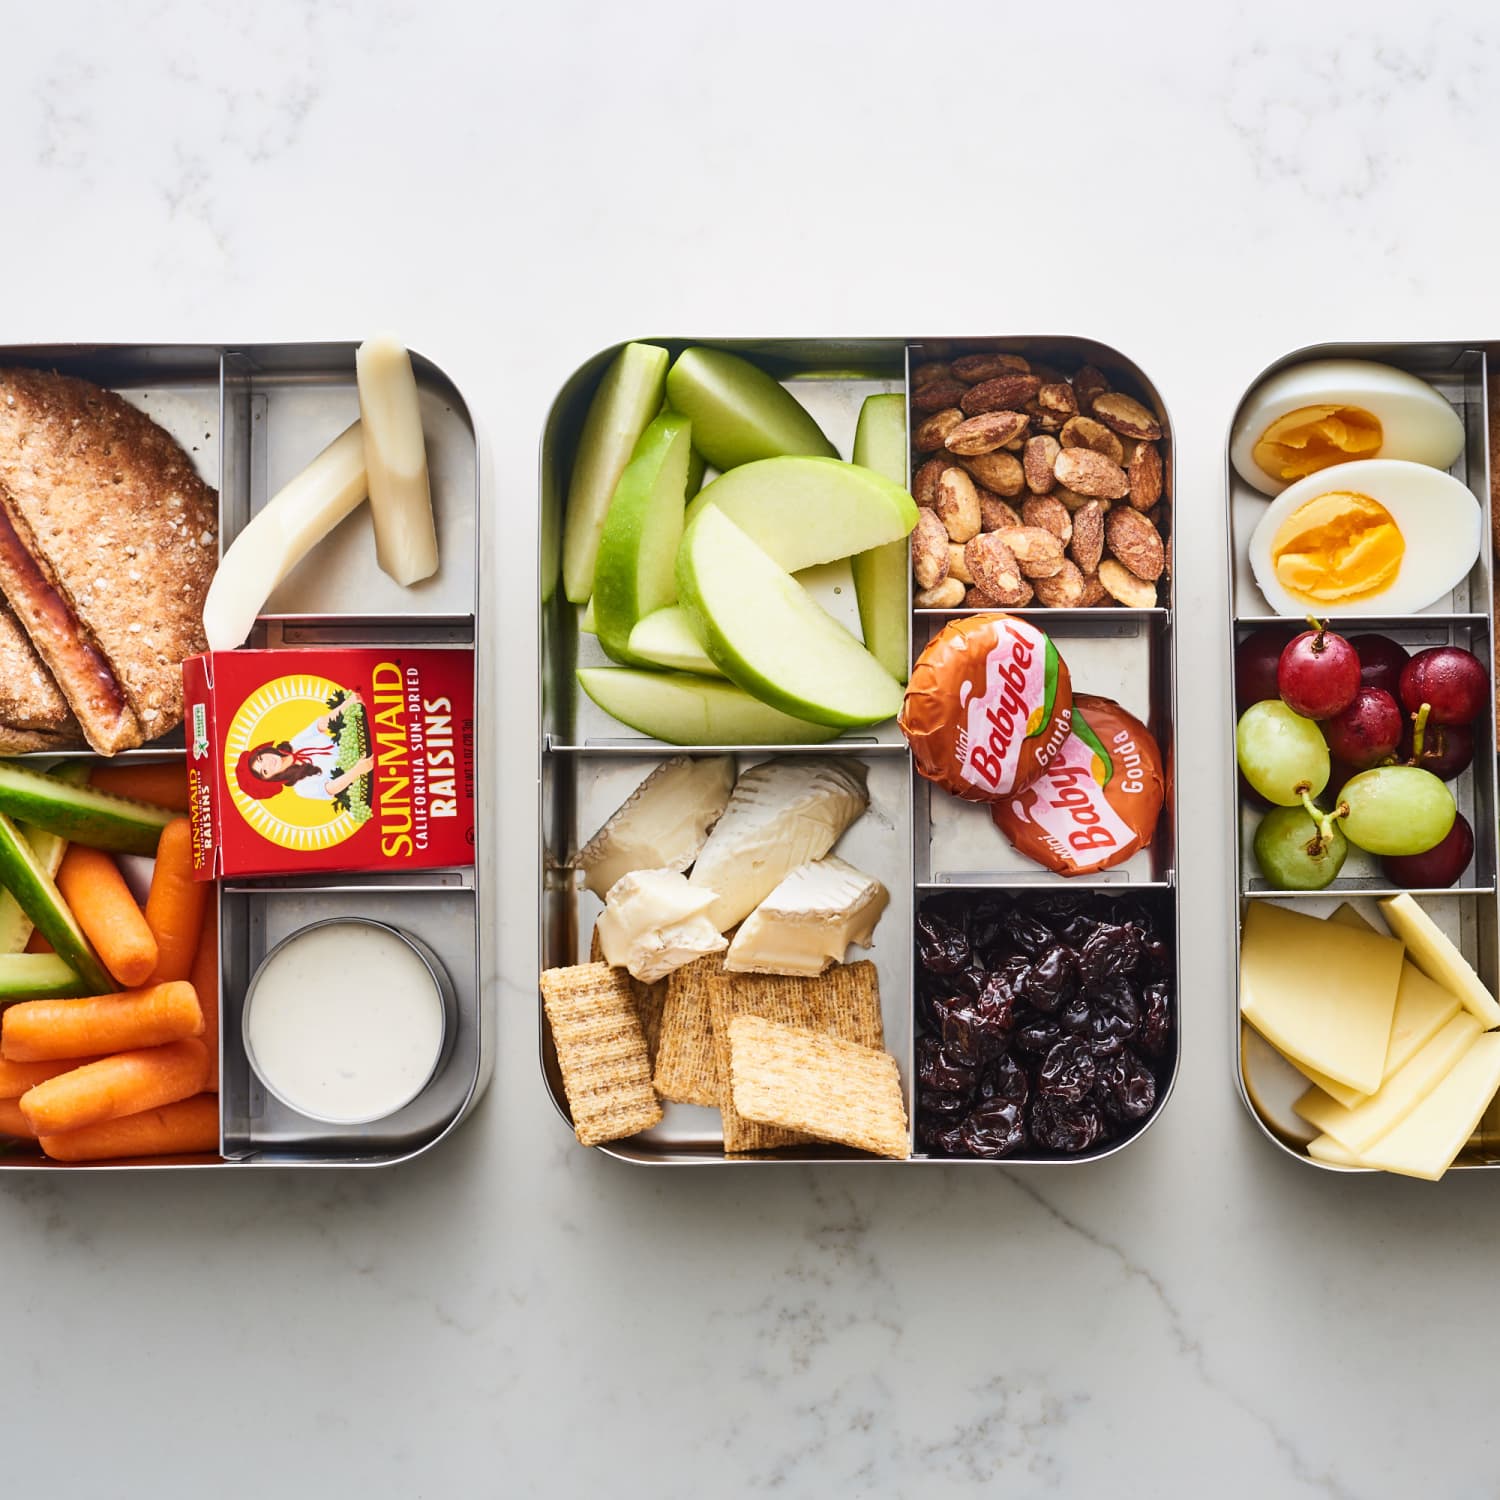 W&P Porter Lunch Box Review: A Meal Prep Game Changer